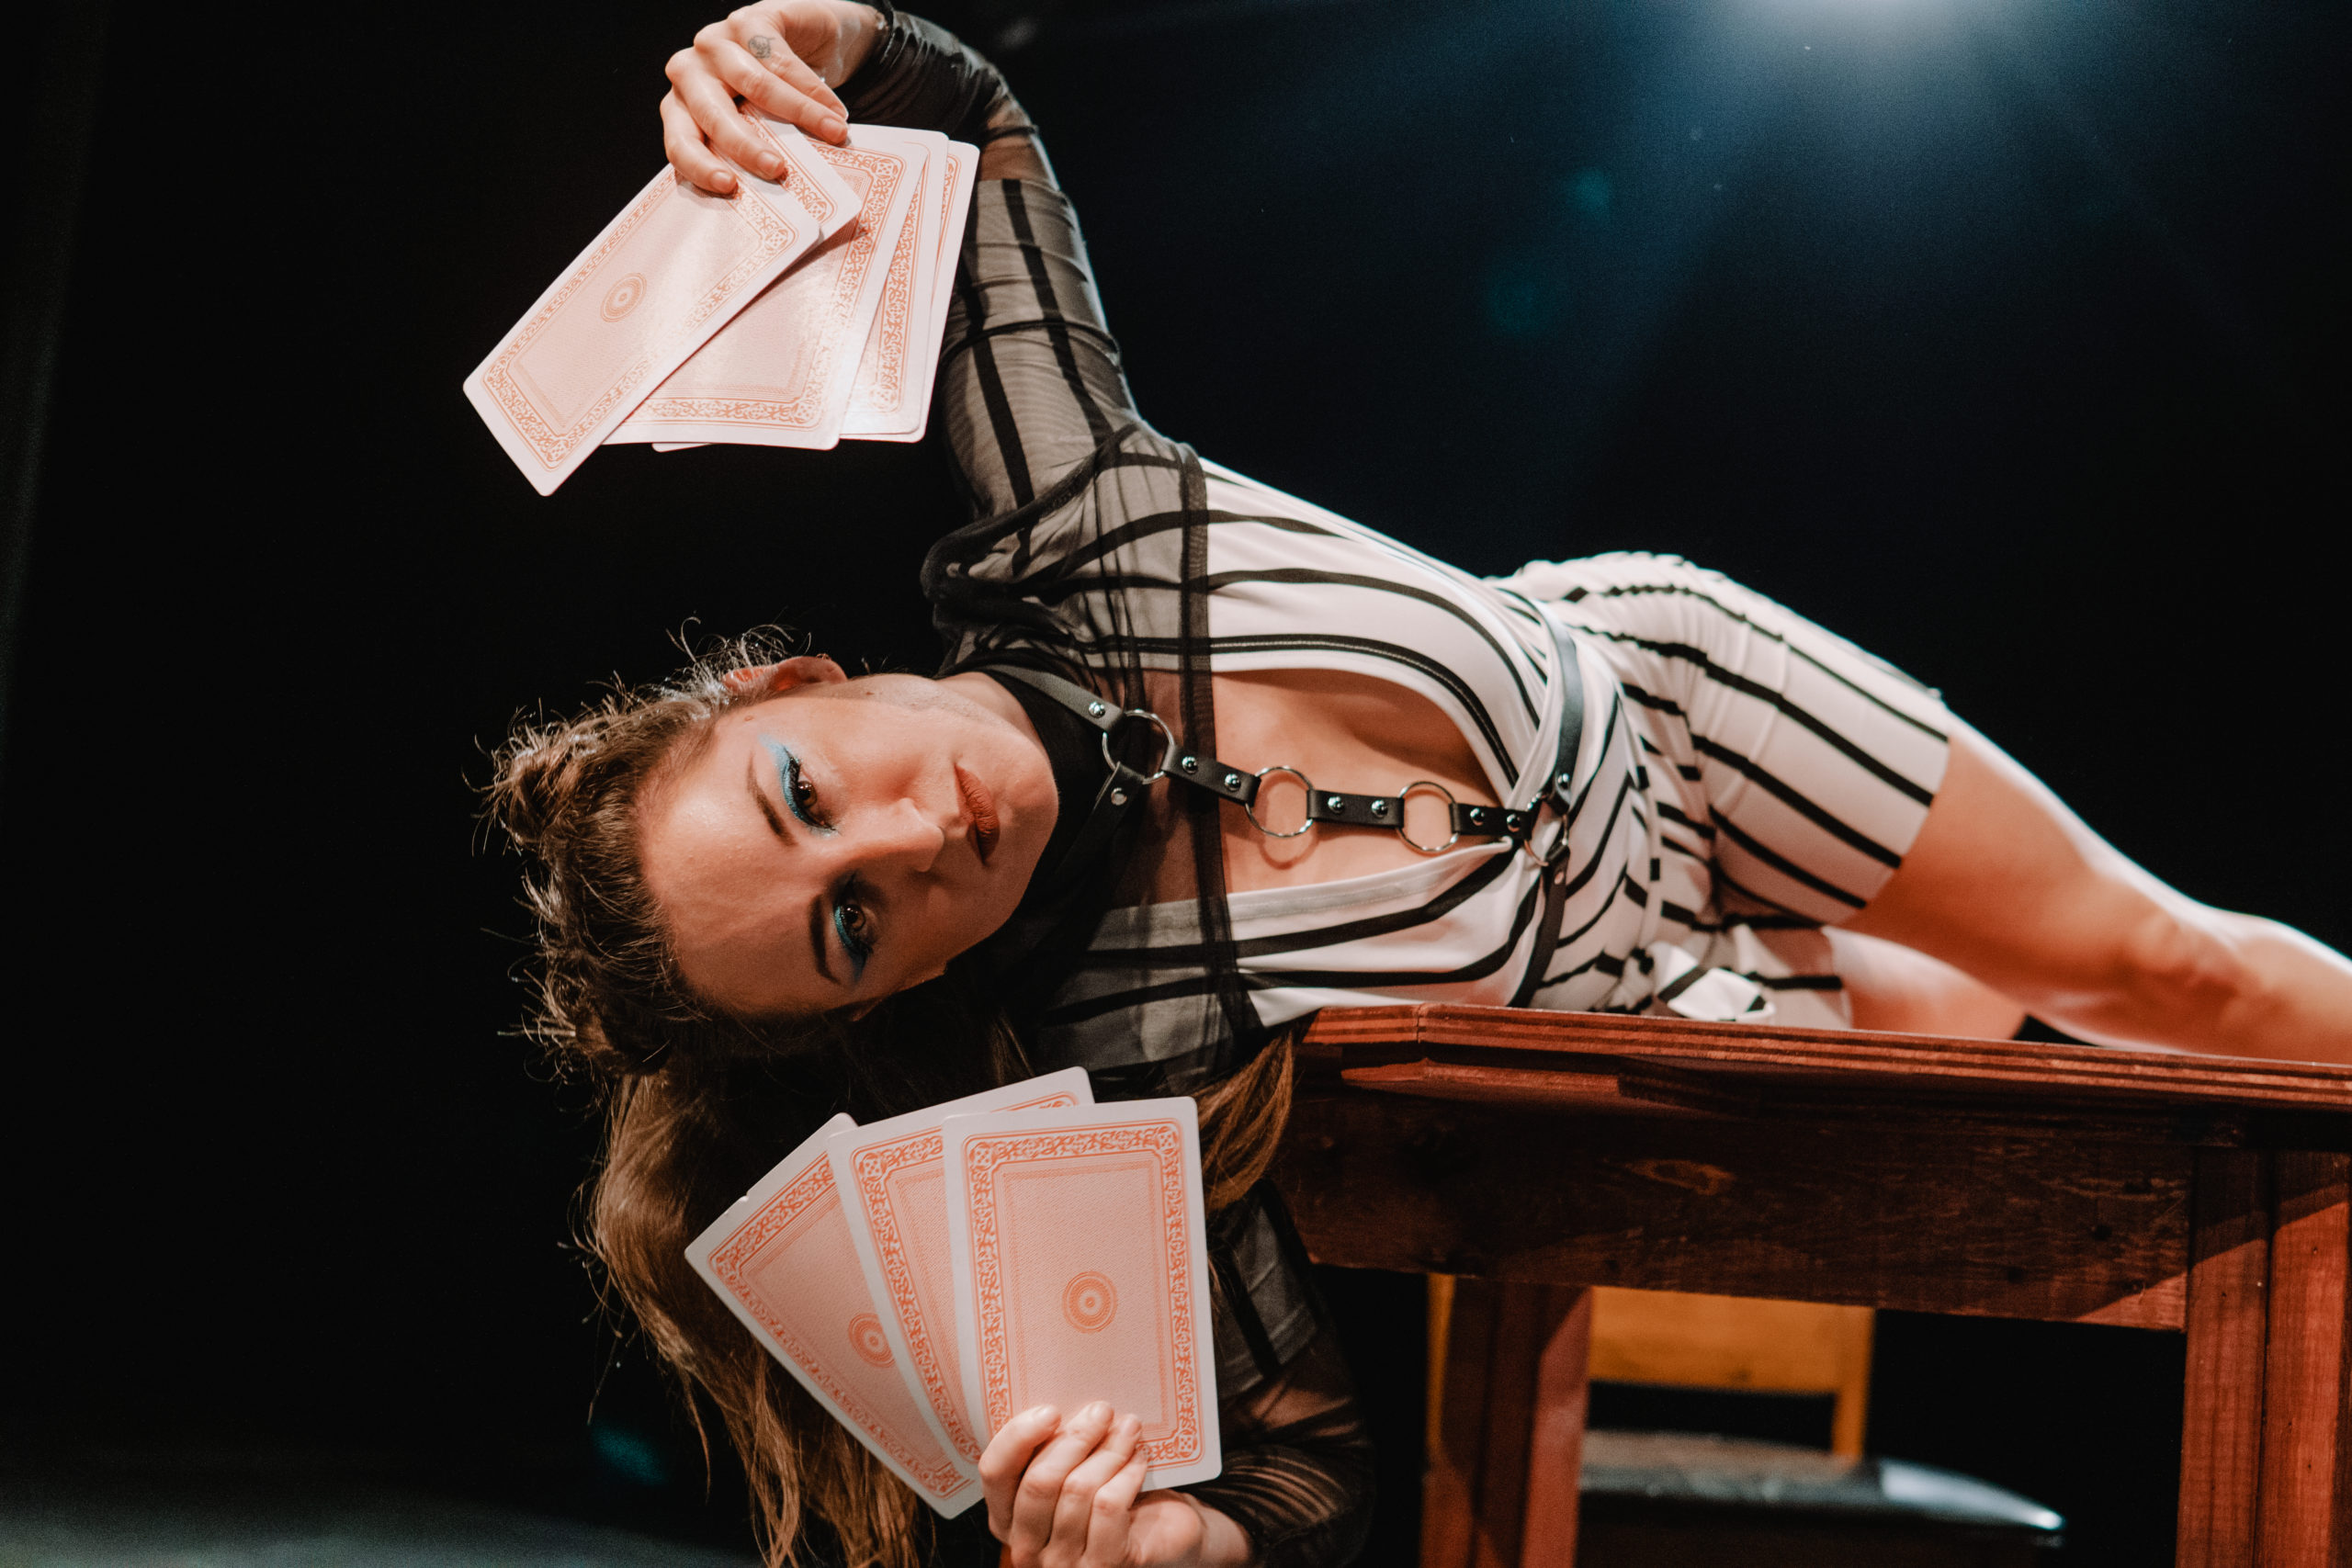 dancer wearing striped costume laying on a table